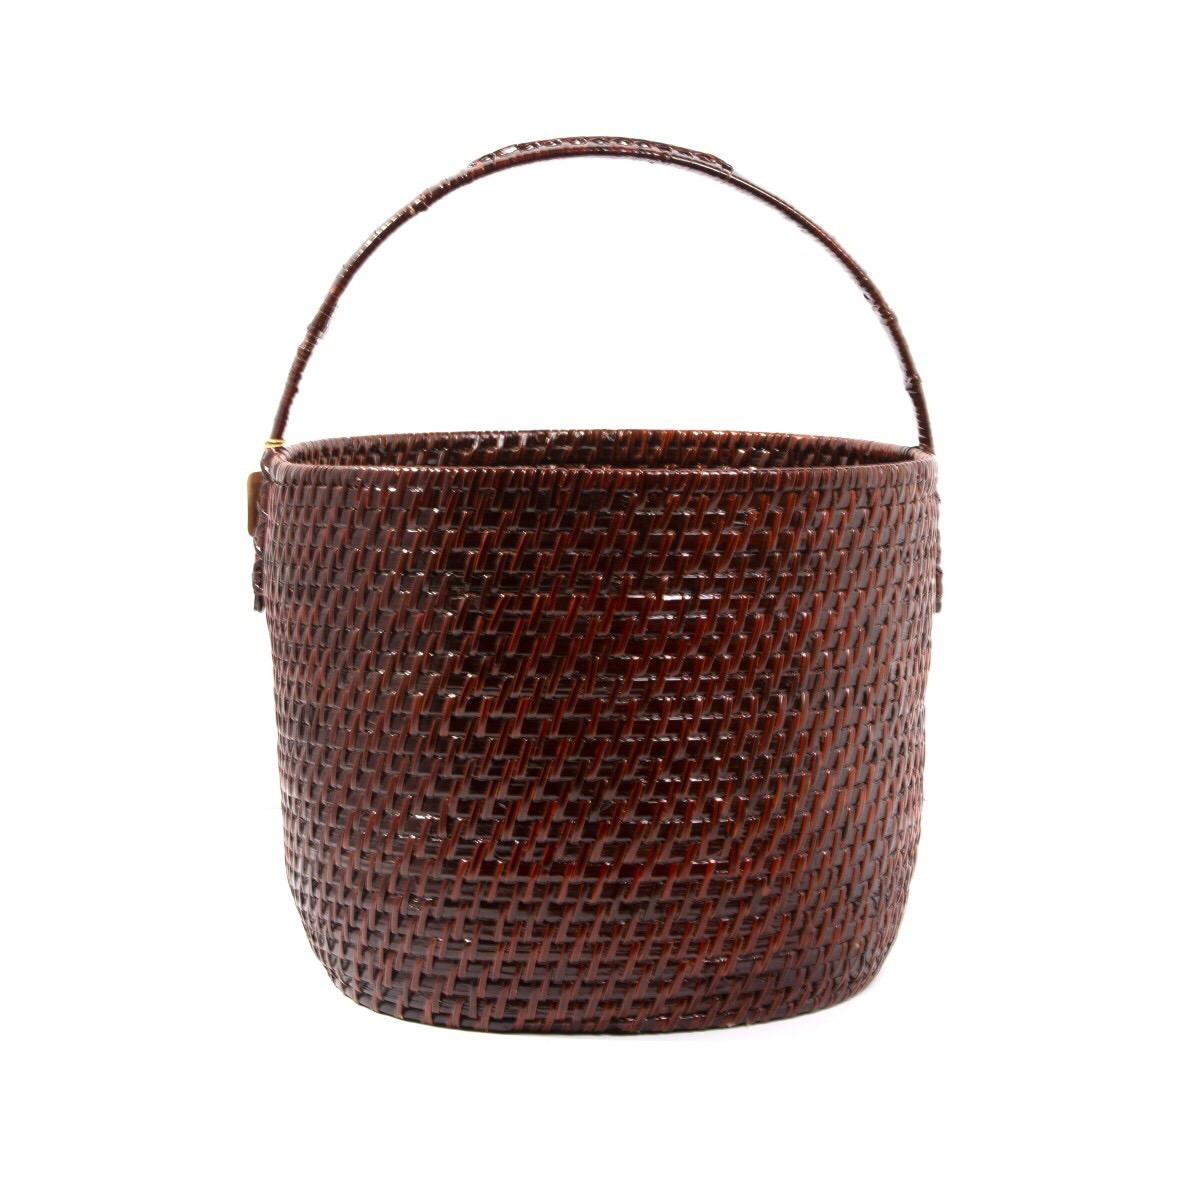 A vintage Japanese woven basket with handle. Originally sold through the celebrated New York Fifth Avenue retailer Takashimaya. Japan, circa 1940. Features a varnished finish.

Dimensions: 15.5 inches L × 13 inches D × 16 inches H